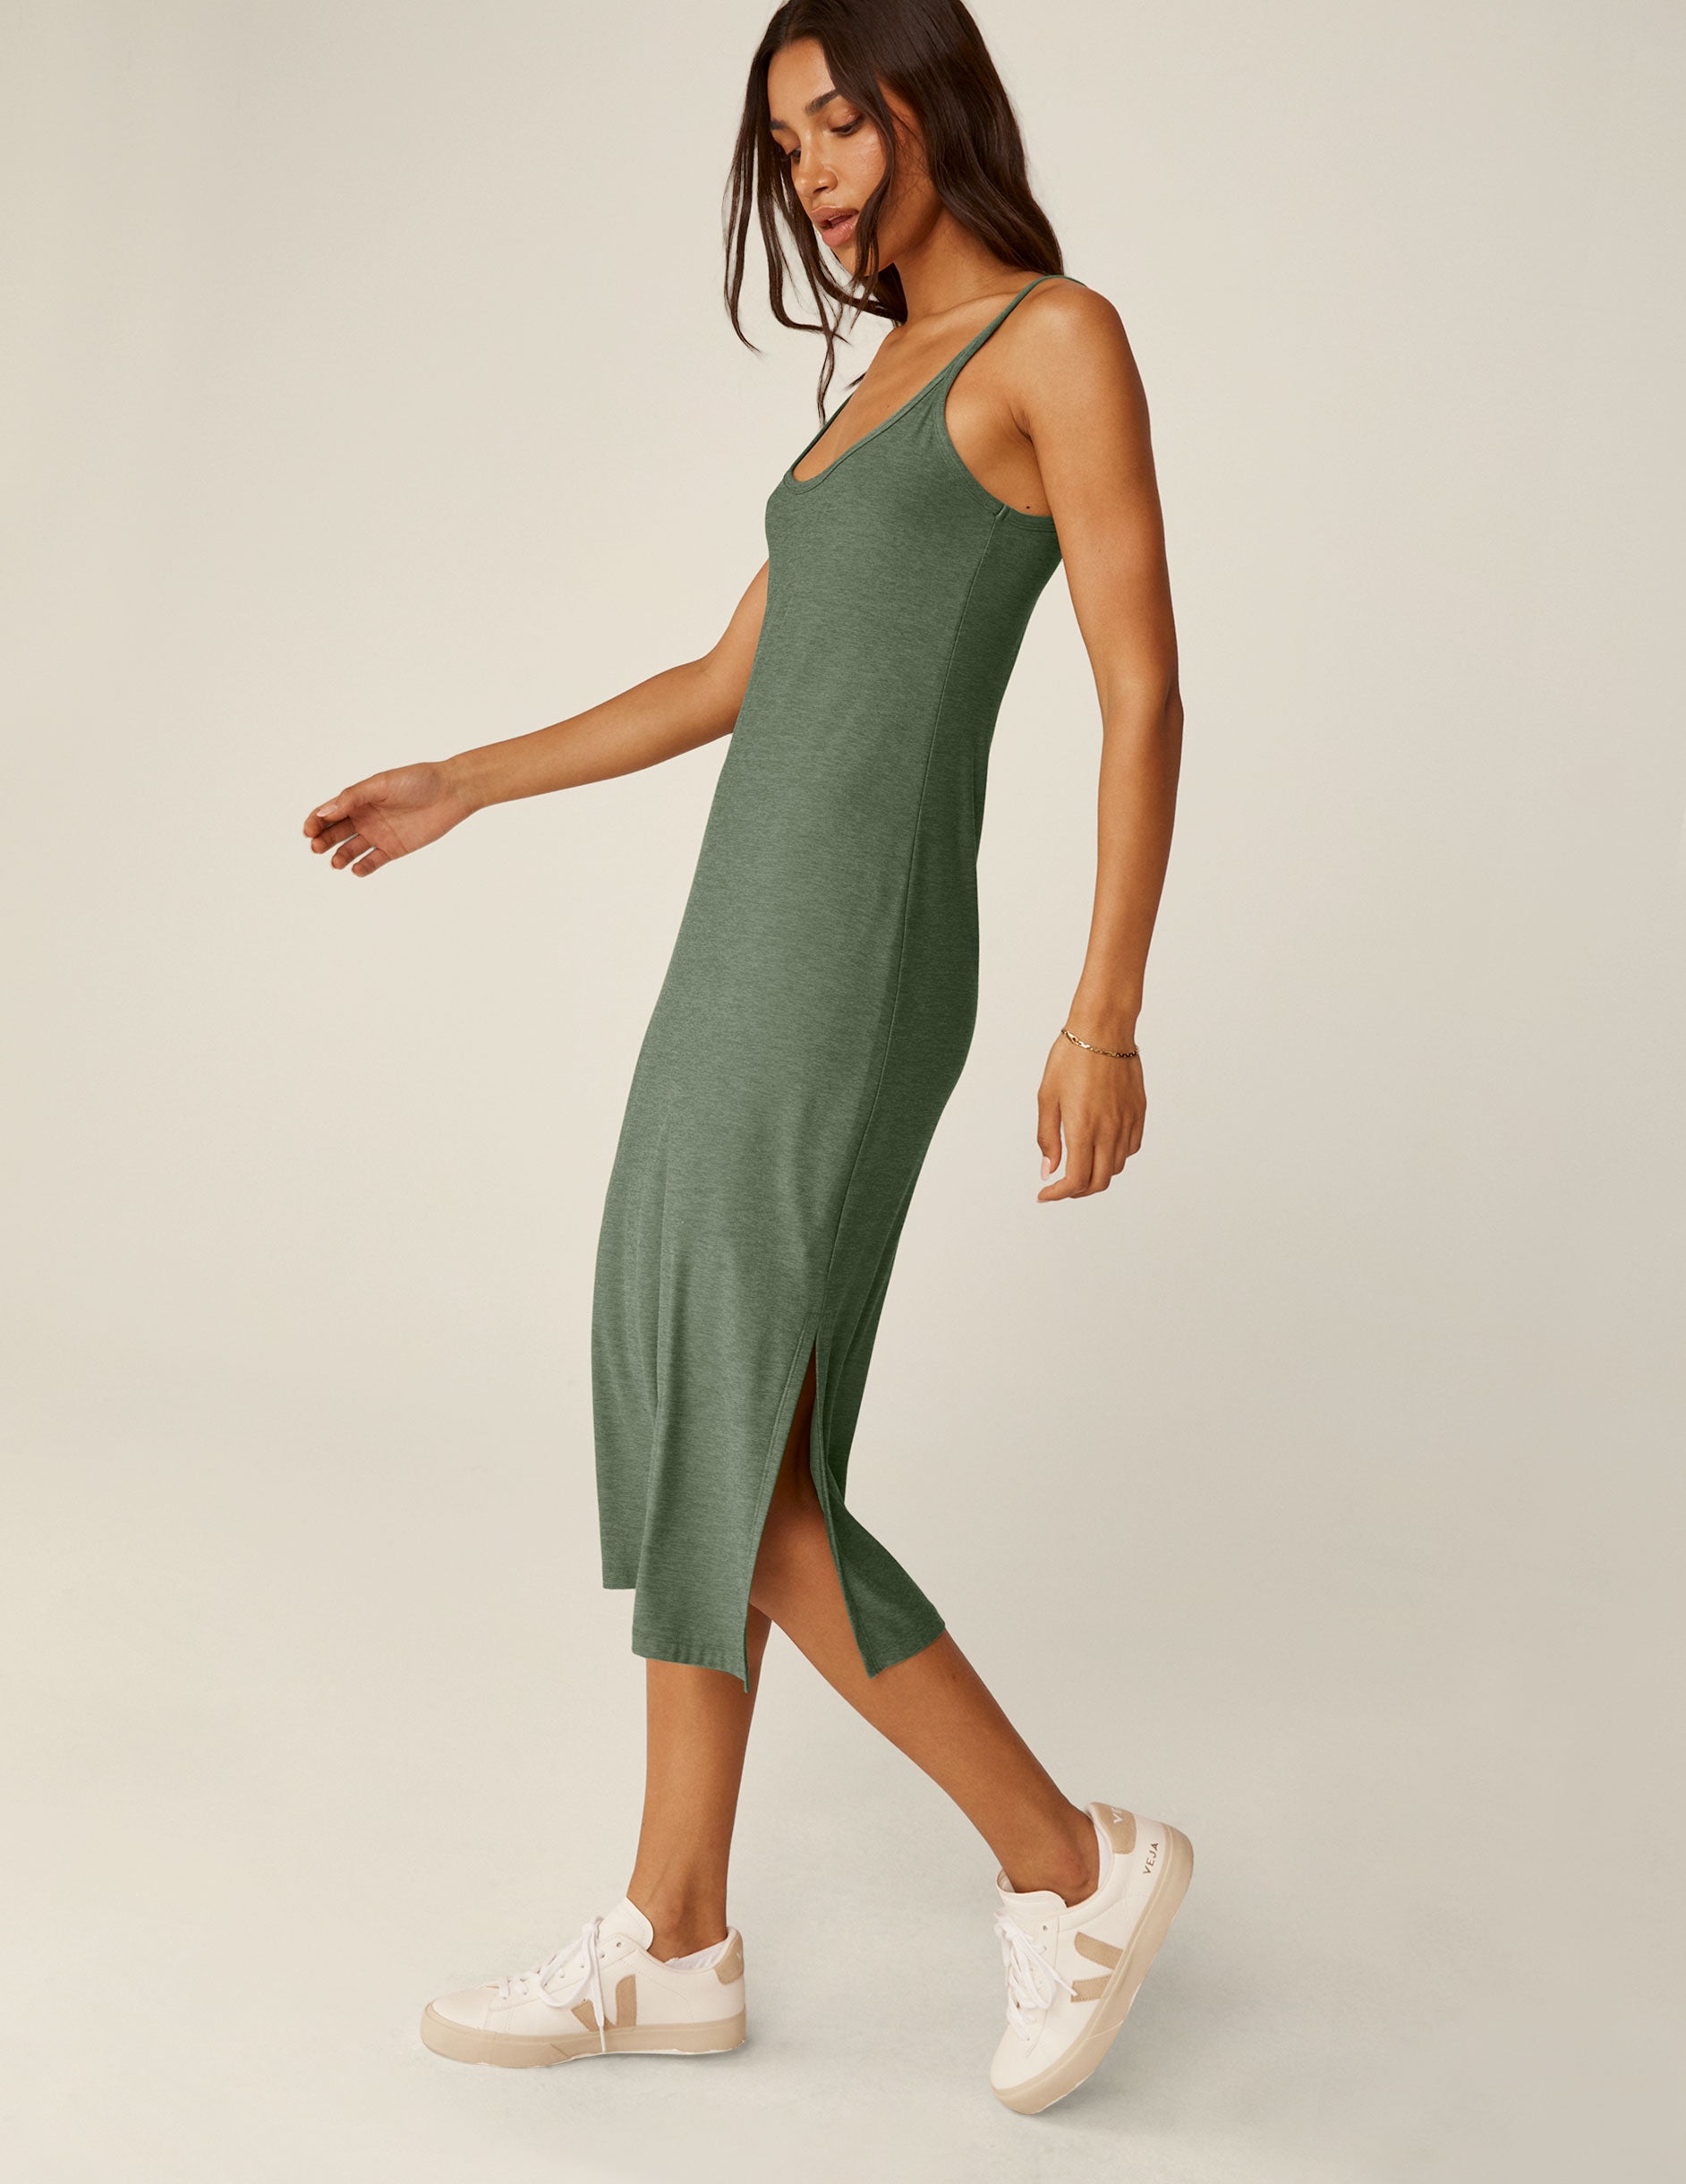 green scoop neck midi dress with slits on each side.